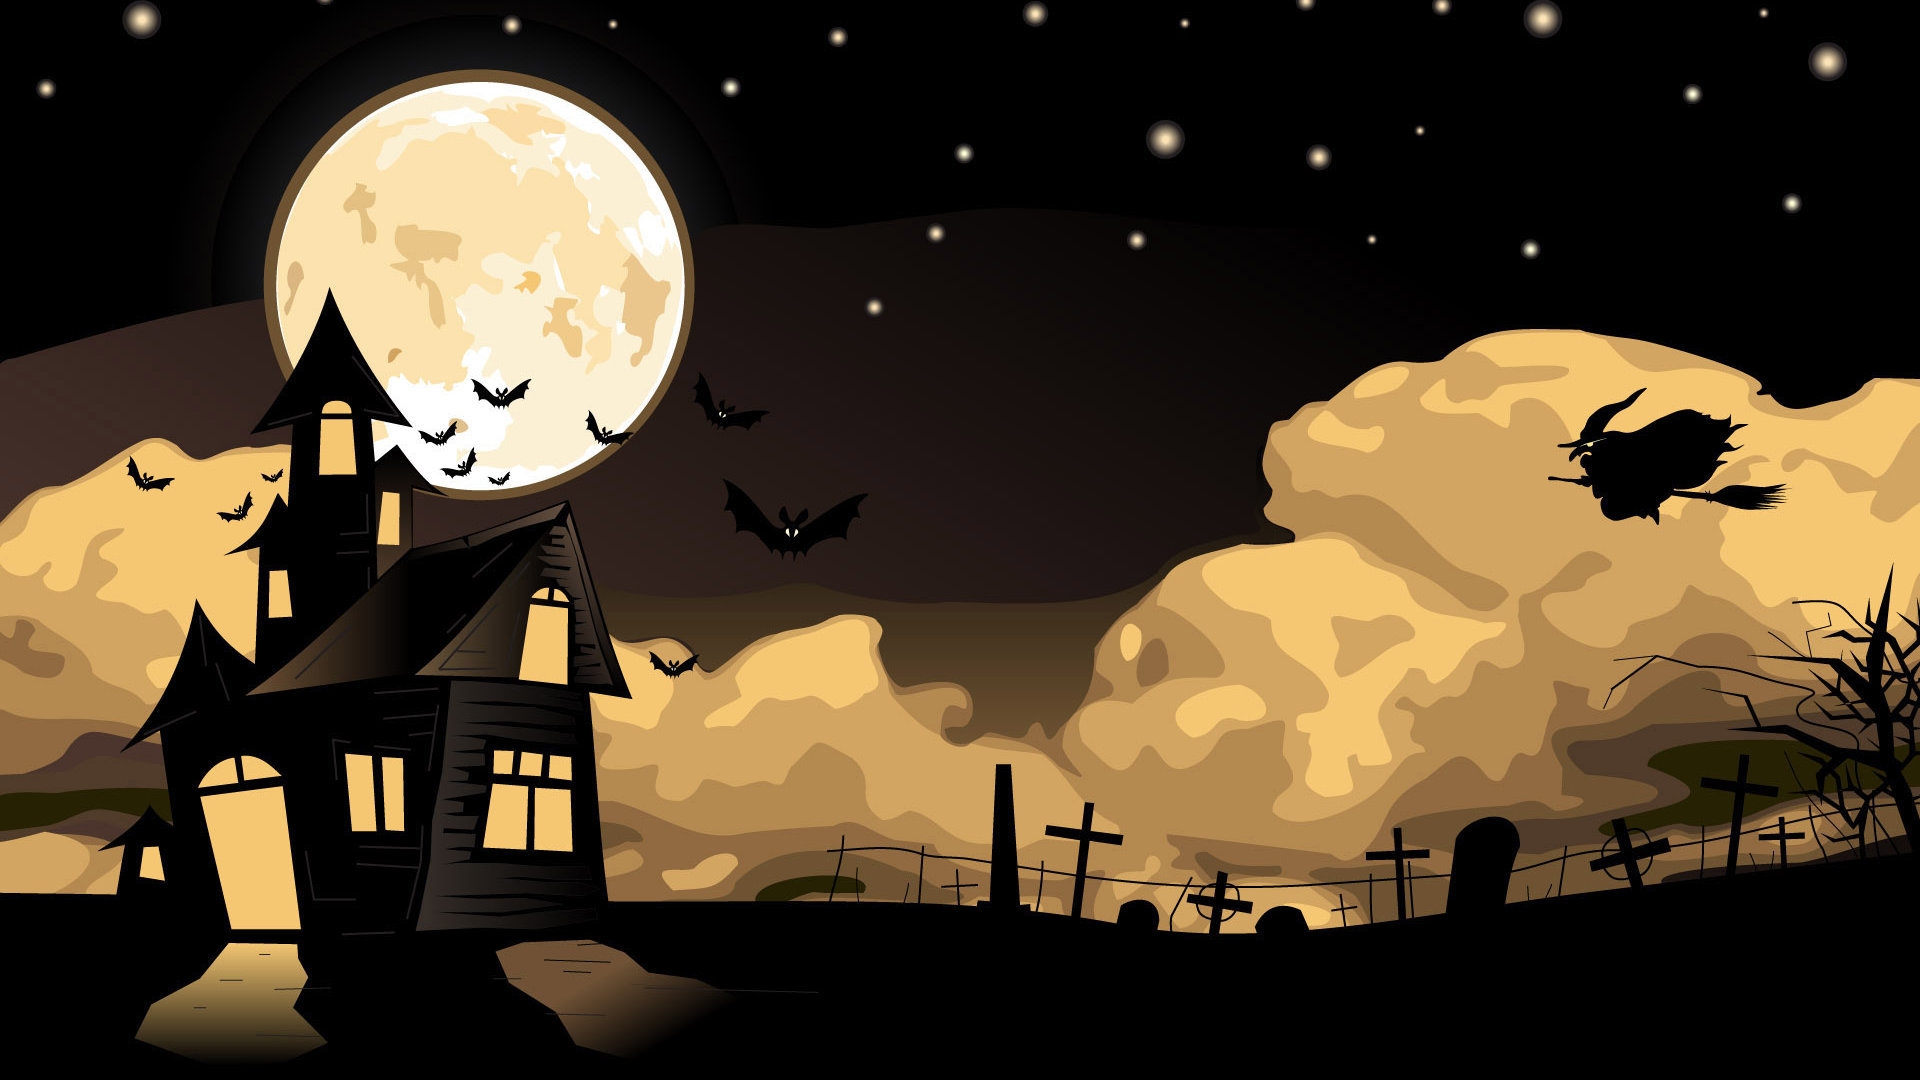 The Halloween Night for 1920 x 1080 HDTV 1080p resolution